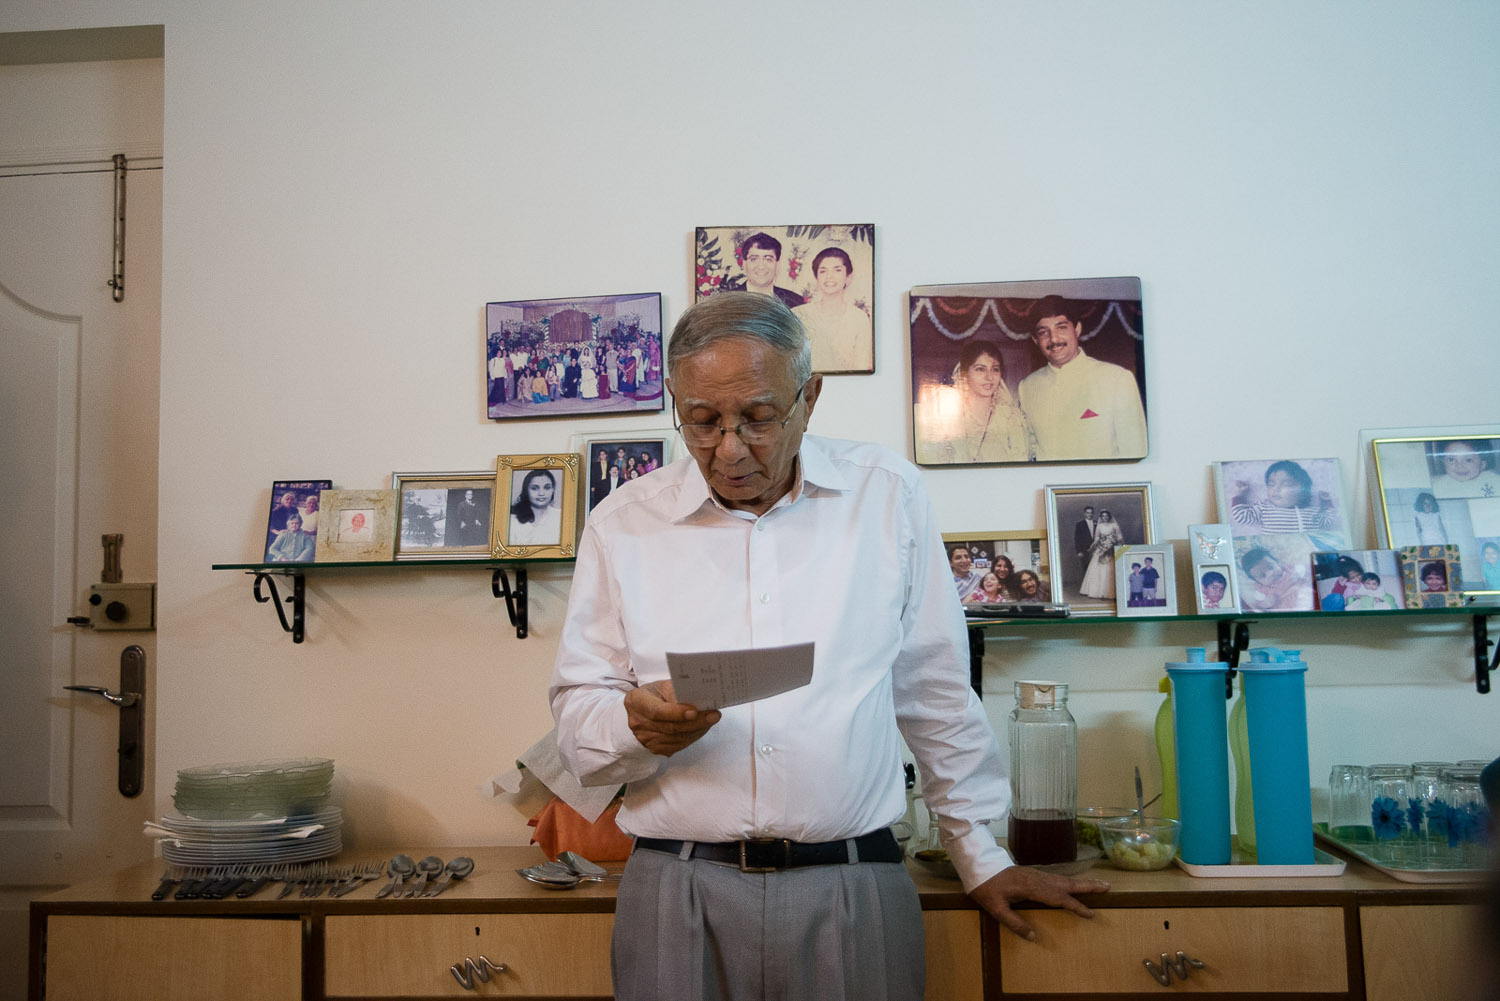  Norman Elijah, a member of the reform congregation in Mumbai, reads a letter from the head of the Union for Reform Judaism, congratulating the community and wishing them a happy new year. 